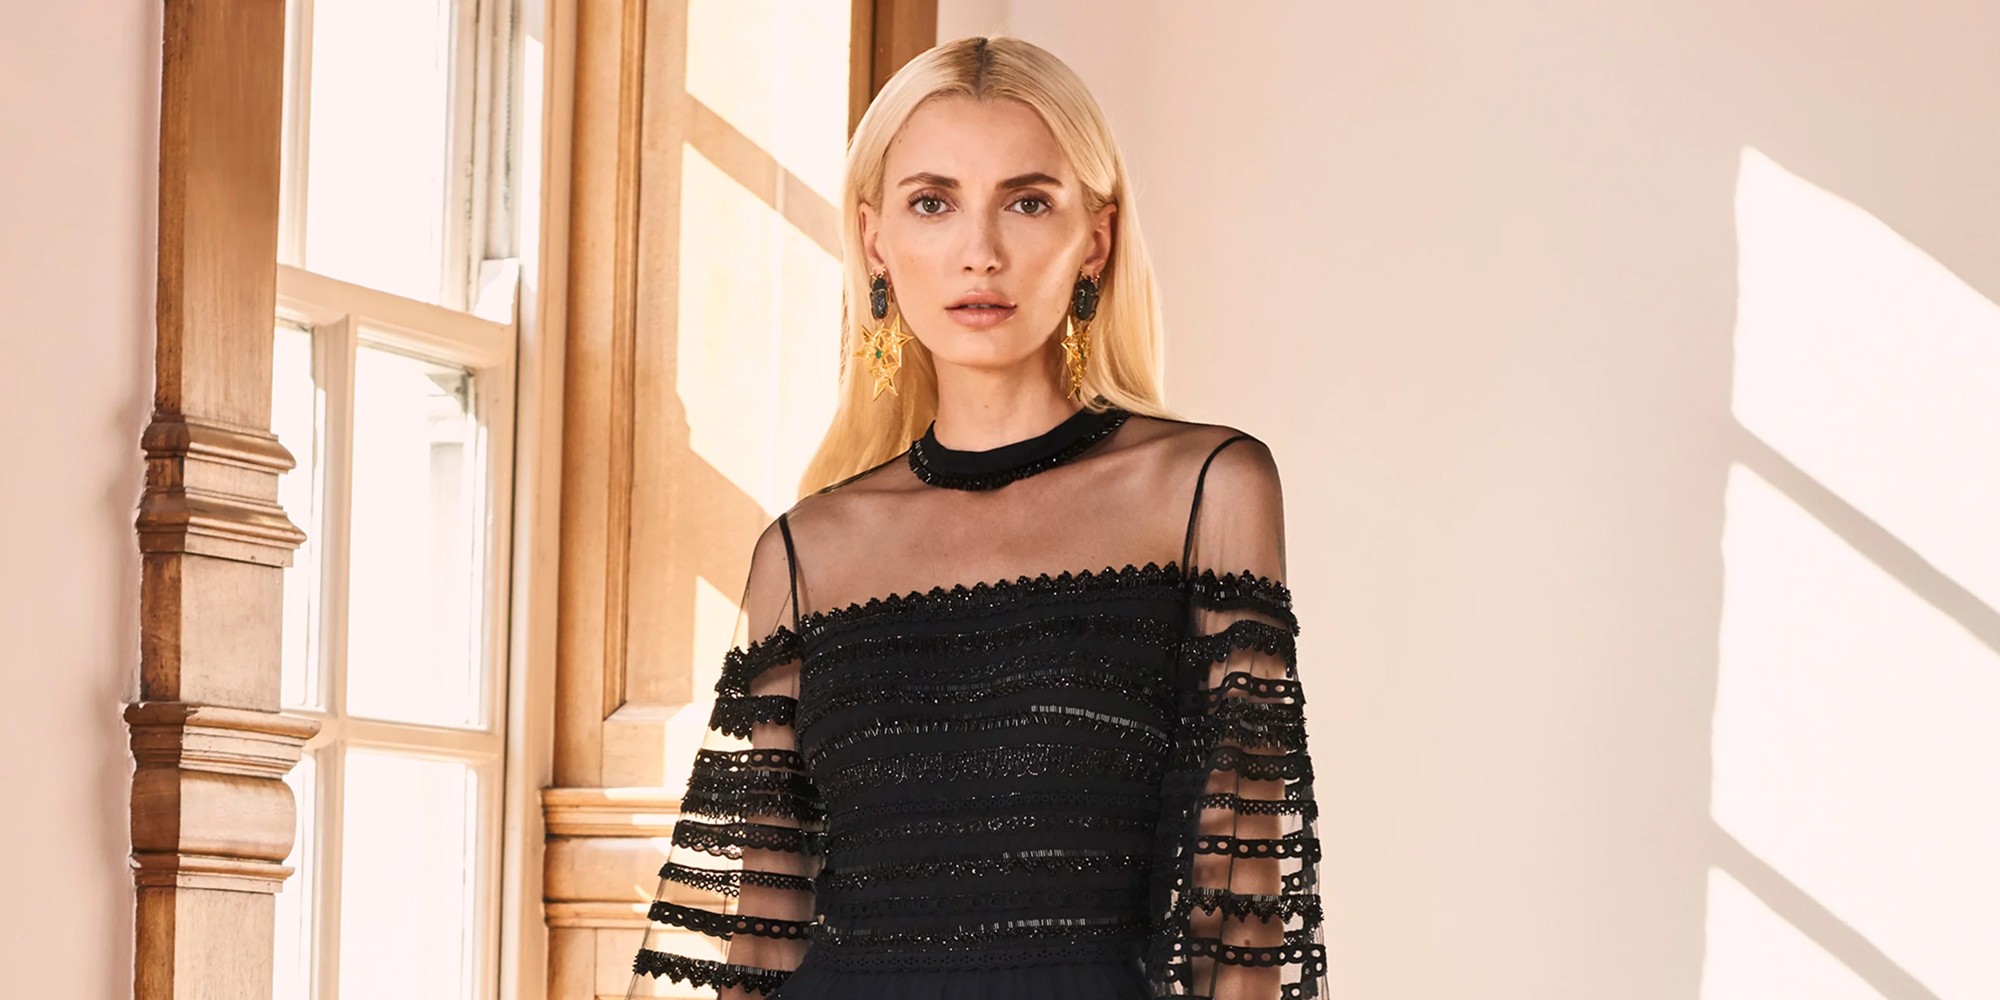 TEMPERLEY LONDON SUMMER 2020 COLLECTION FILM